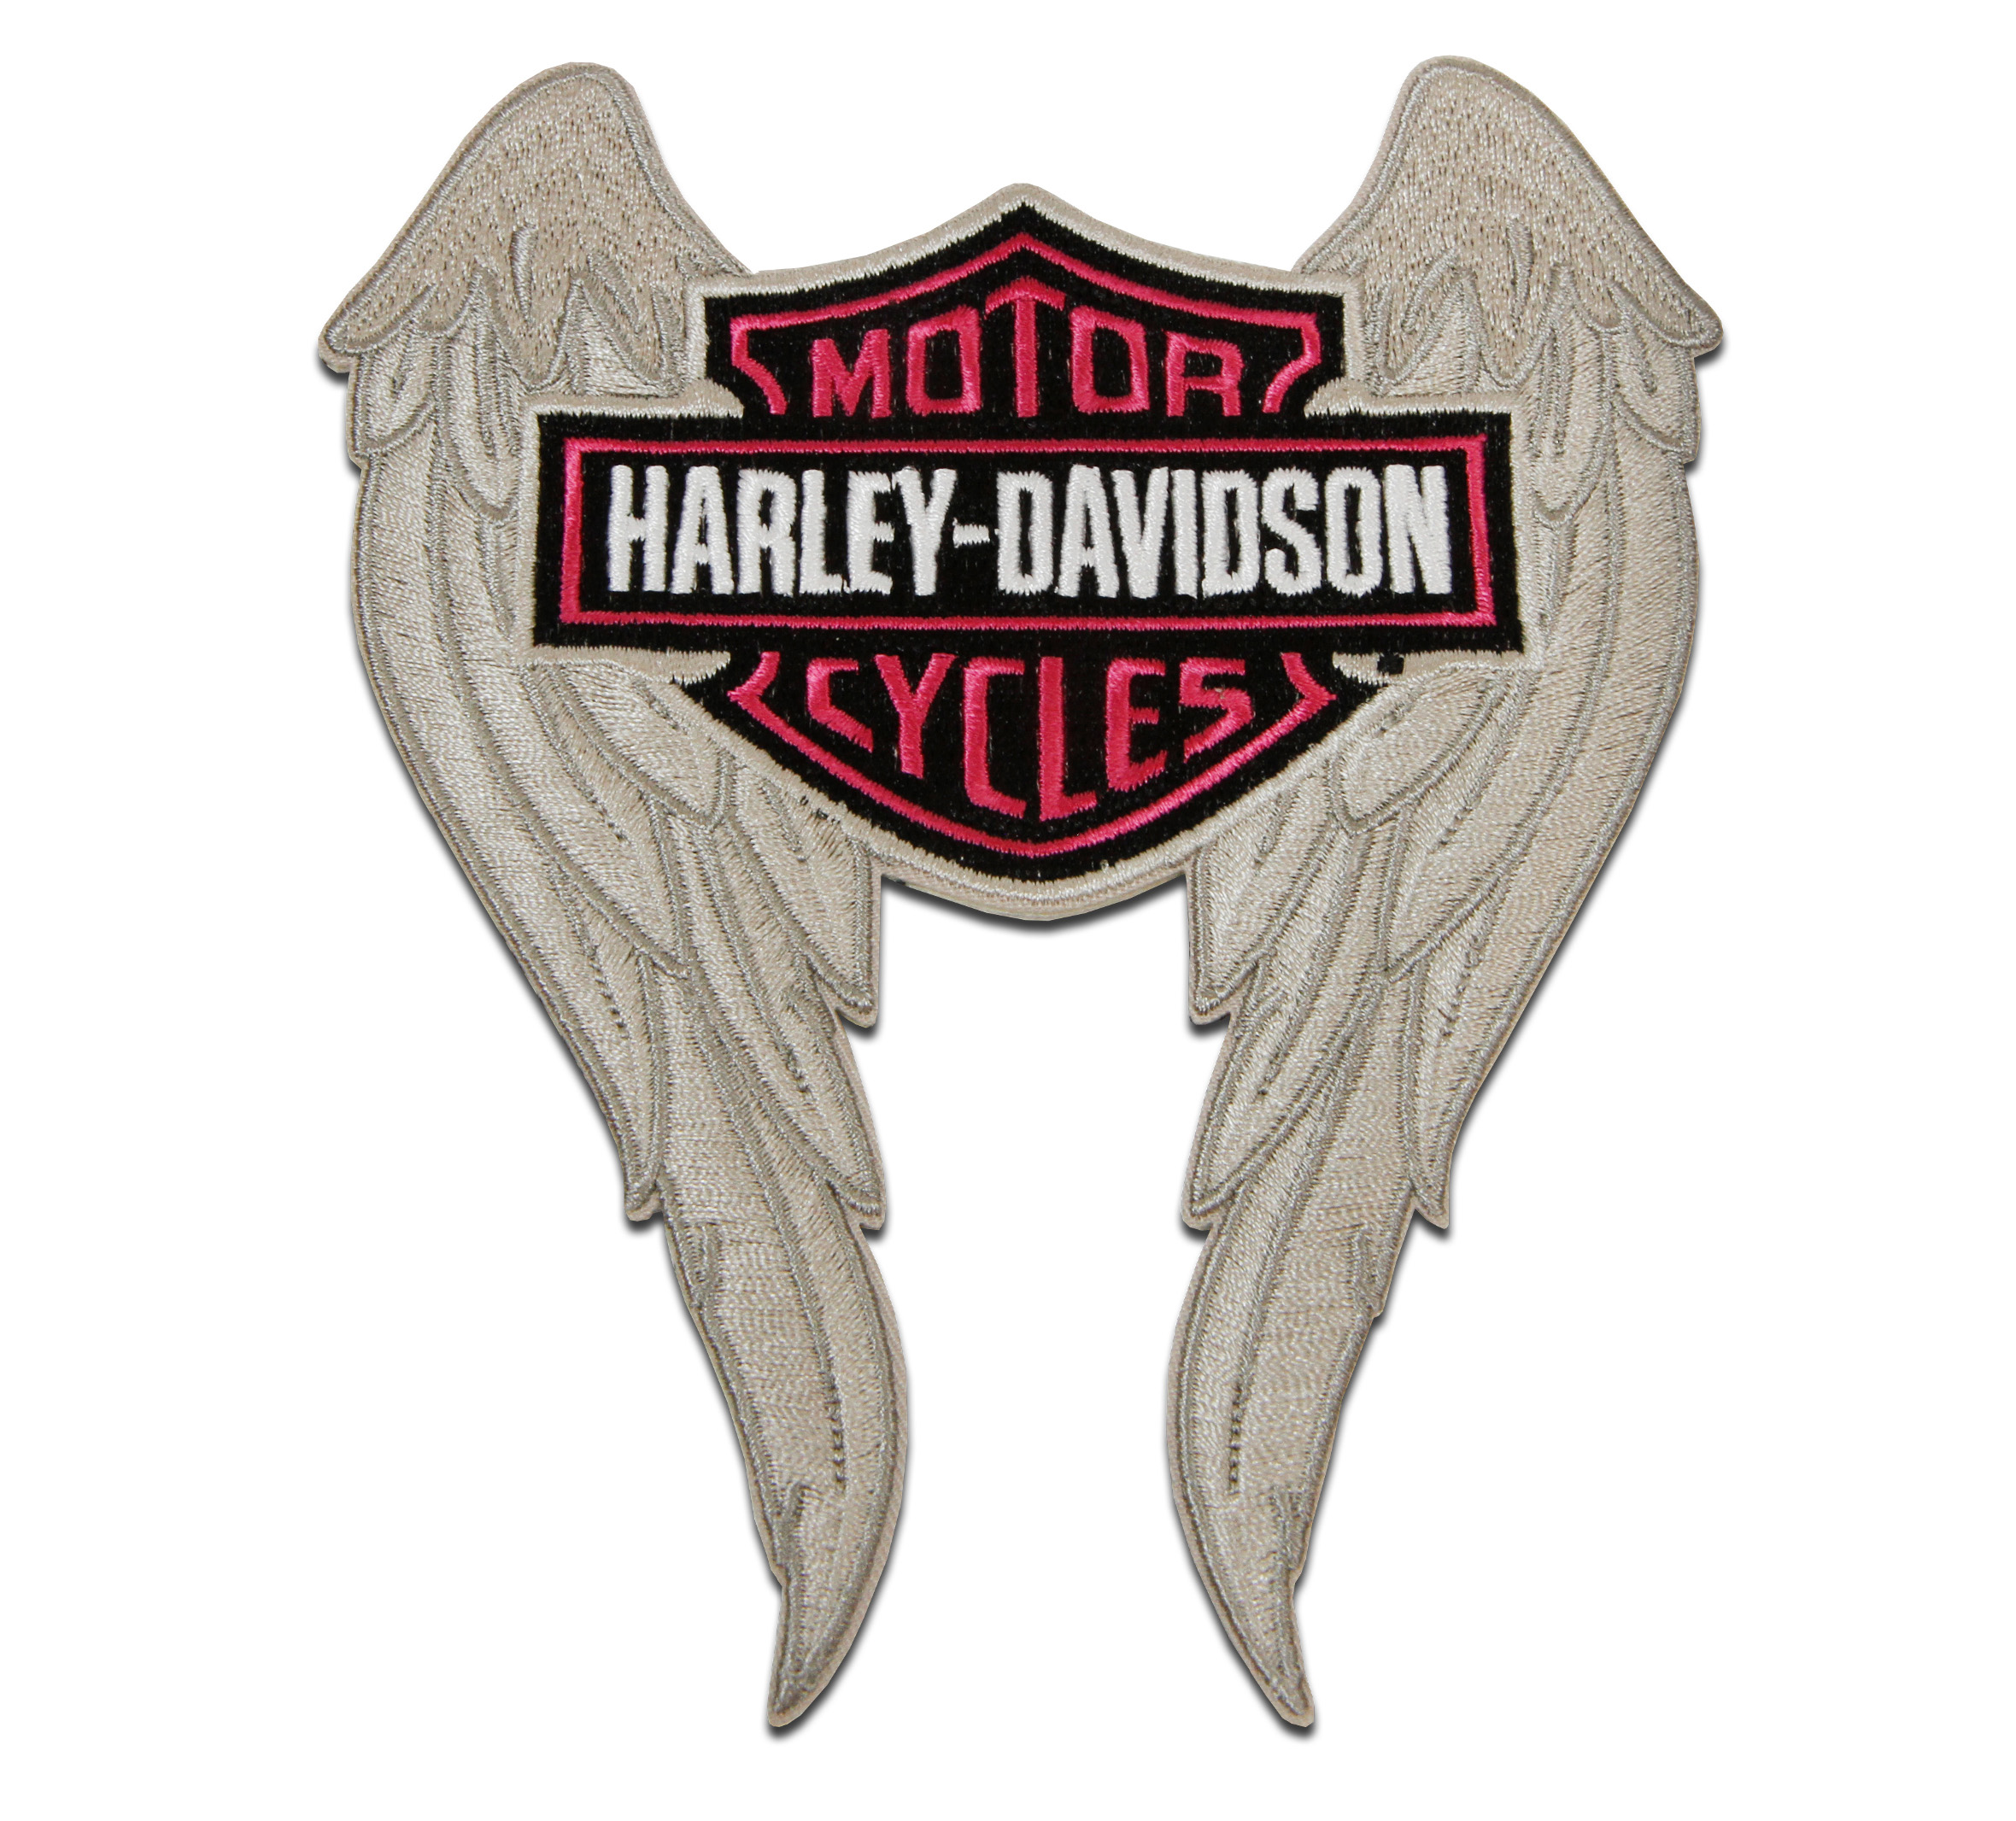 Harley Davidson Patch With Flames Logo. Design for Embroidery